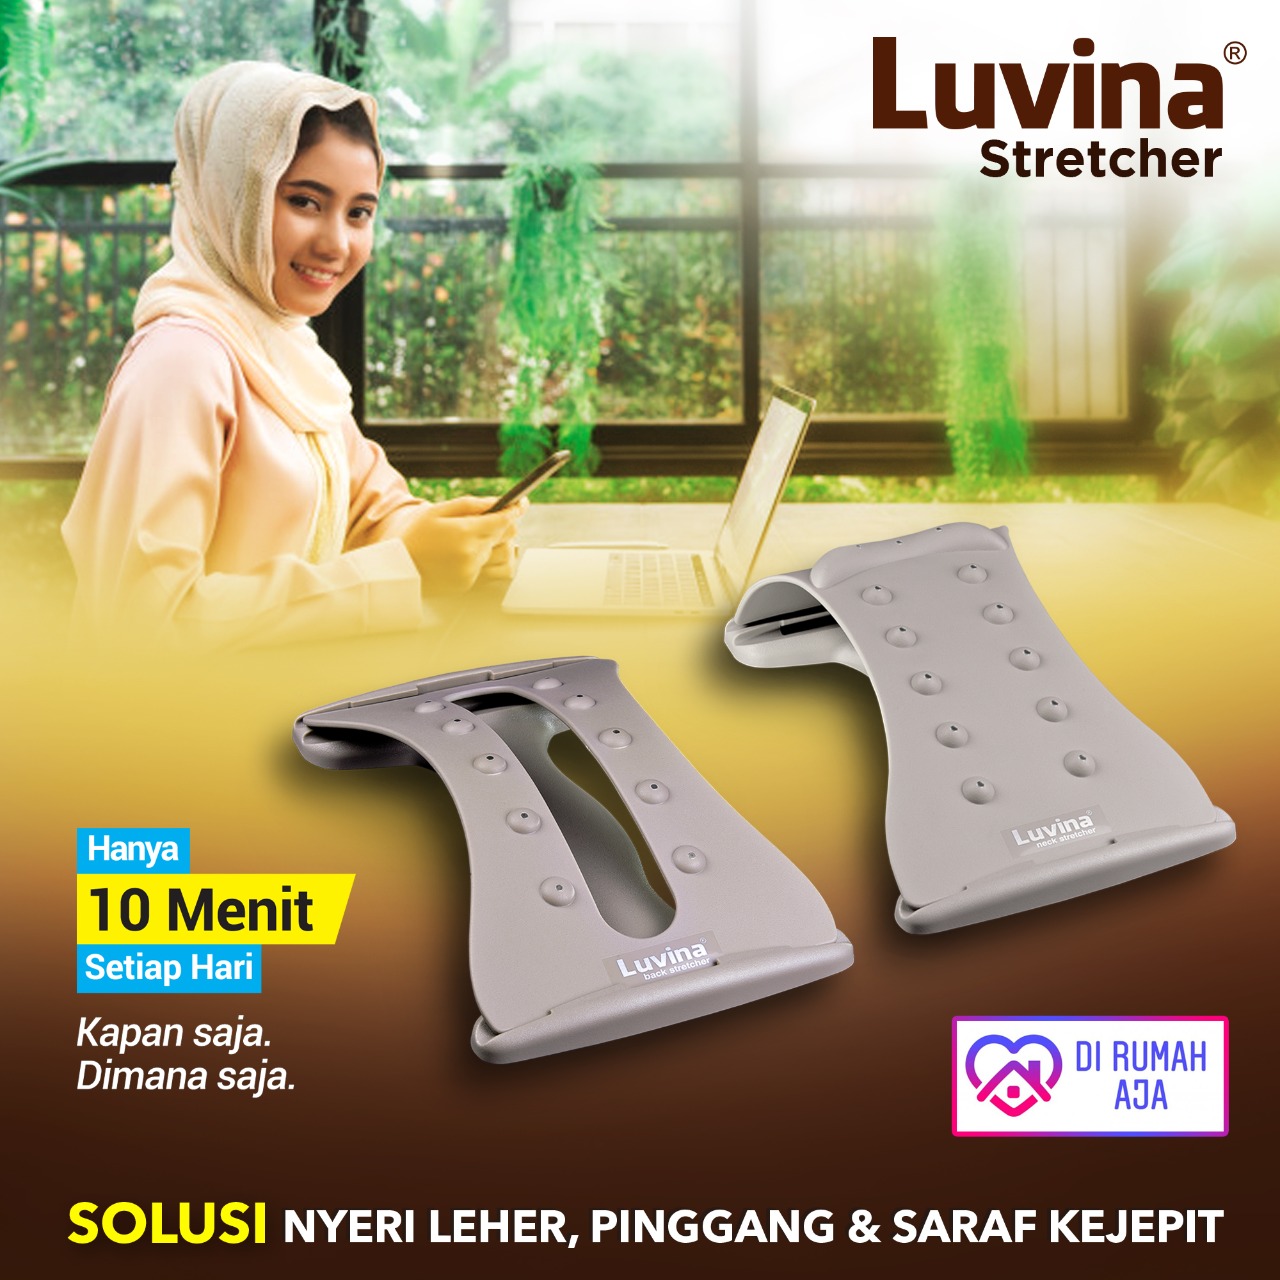 STAY HEALTHY, STAY FRESH  WITH LUVINA STRETCHER WHILE STAY AT HOME!